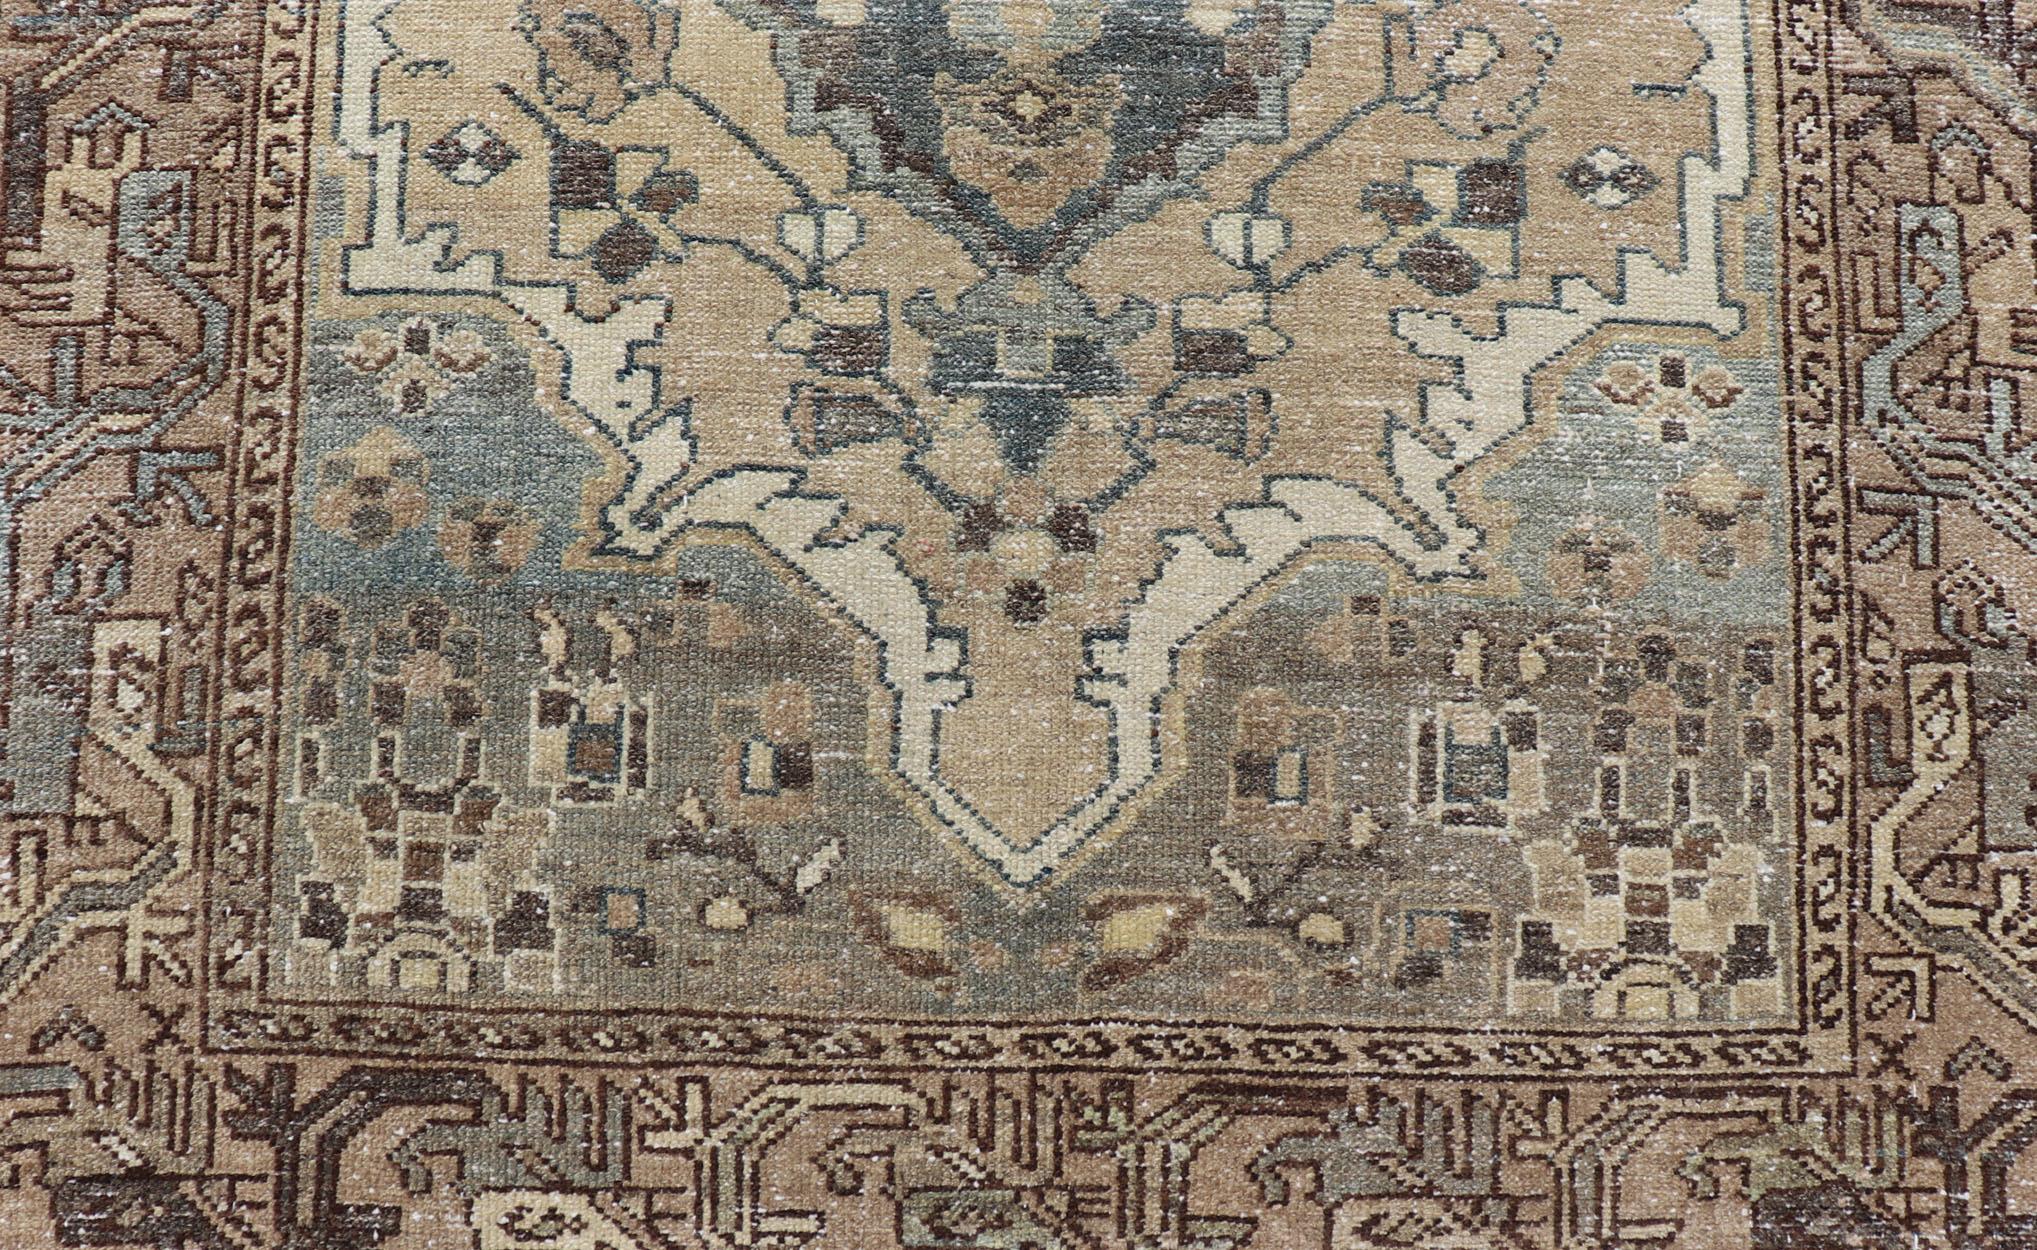 Antique Persian Malayer Runner With Geometric Medallion Design in Blue and Tan In Good Condition For Sale In Atlanta, GA